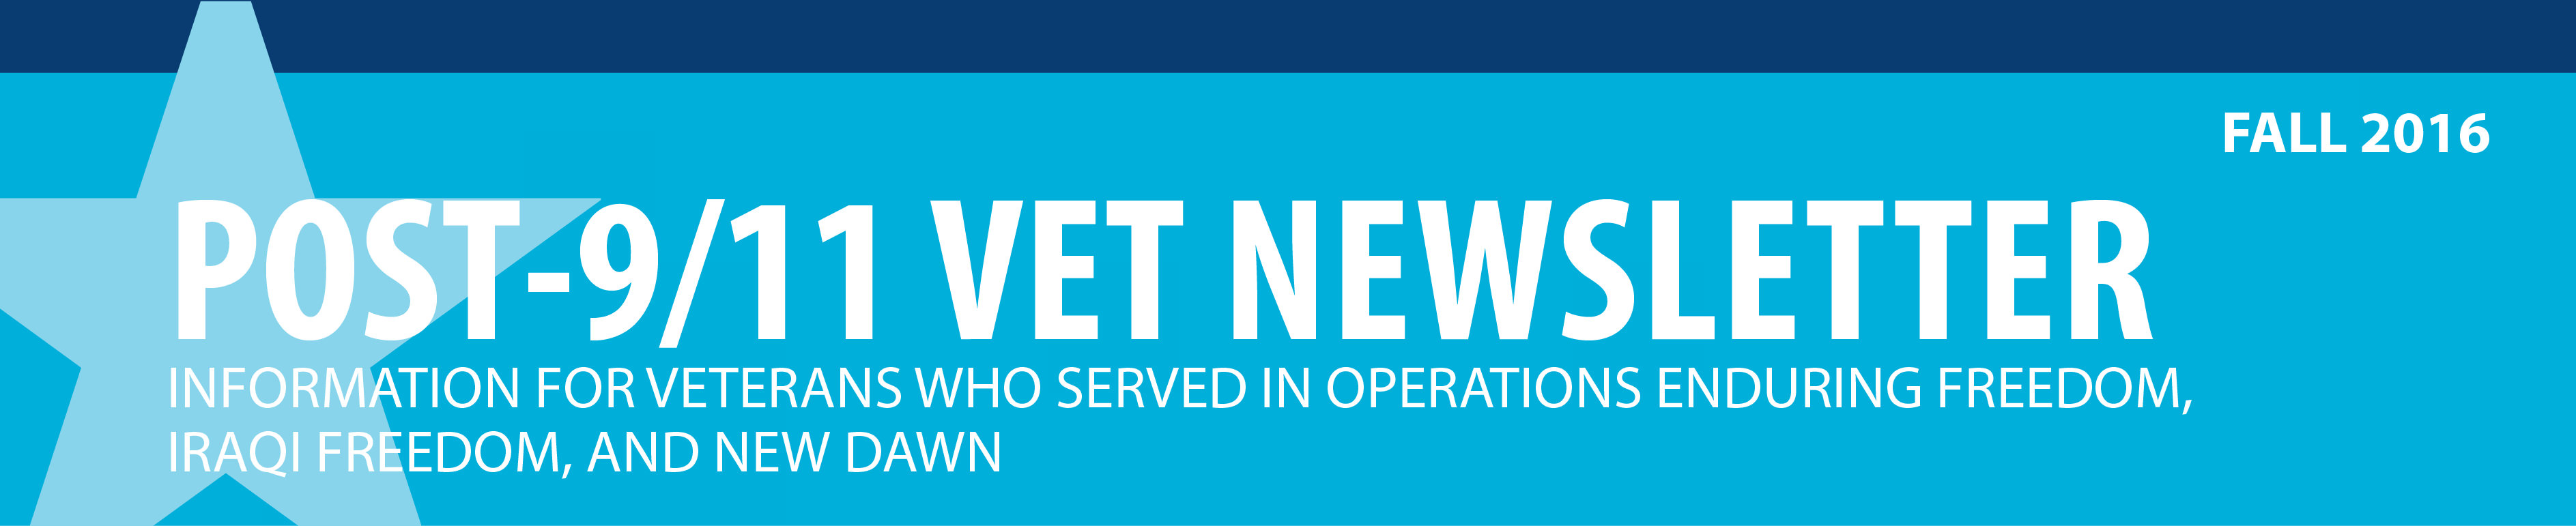 Post-9/11 Vet Newsletter: Information for Veterans who served in Operations Enduring Freedom, Iraqi Freedom, and New Dawn.